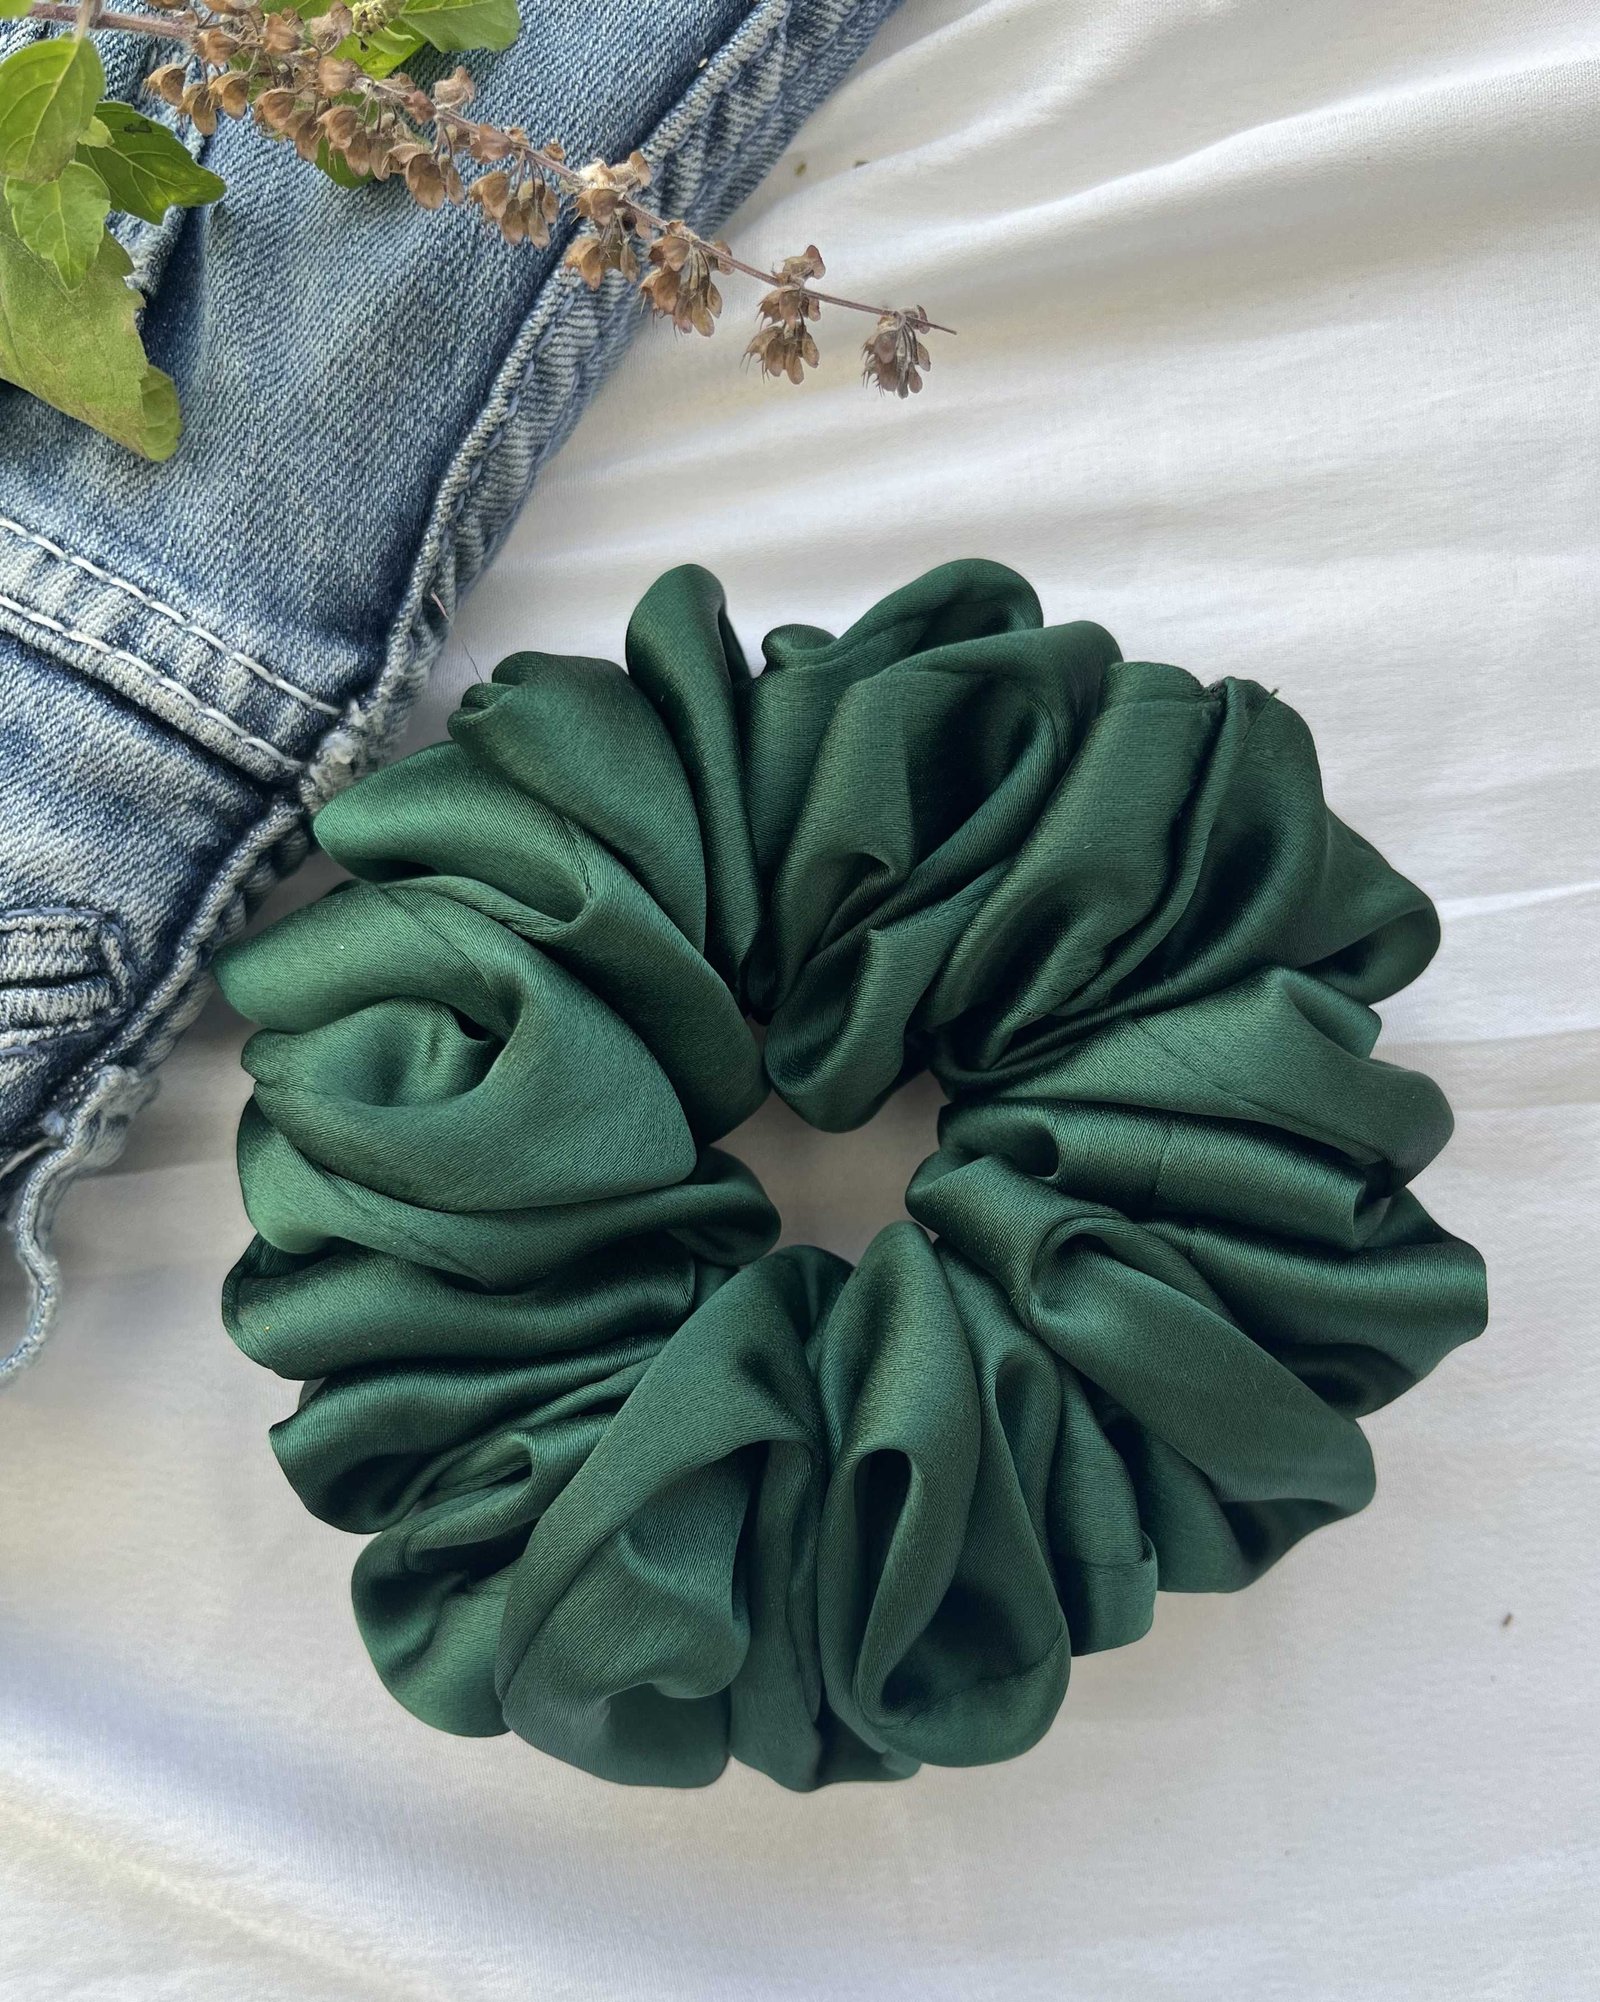 Fashionable Amelia Giant scrunchies, perfect for adding a trendy and chic touch to your hairstyles and making a statement.